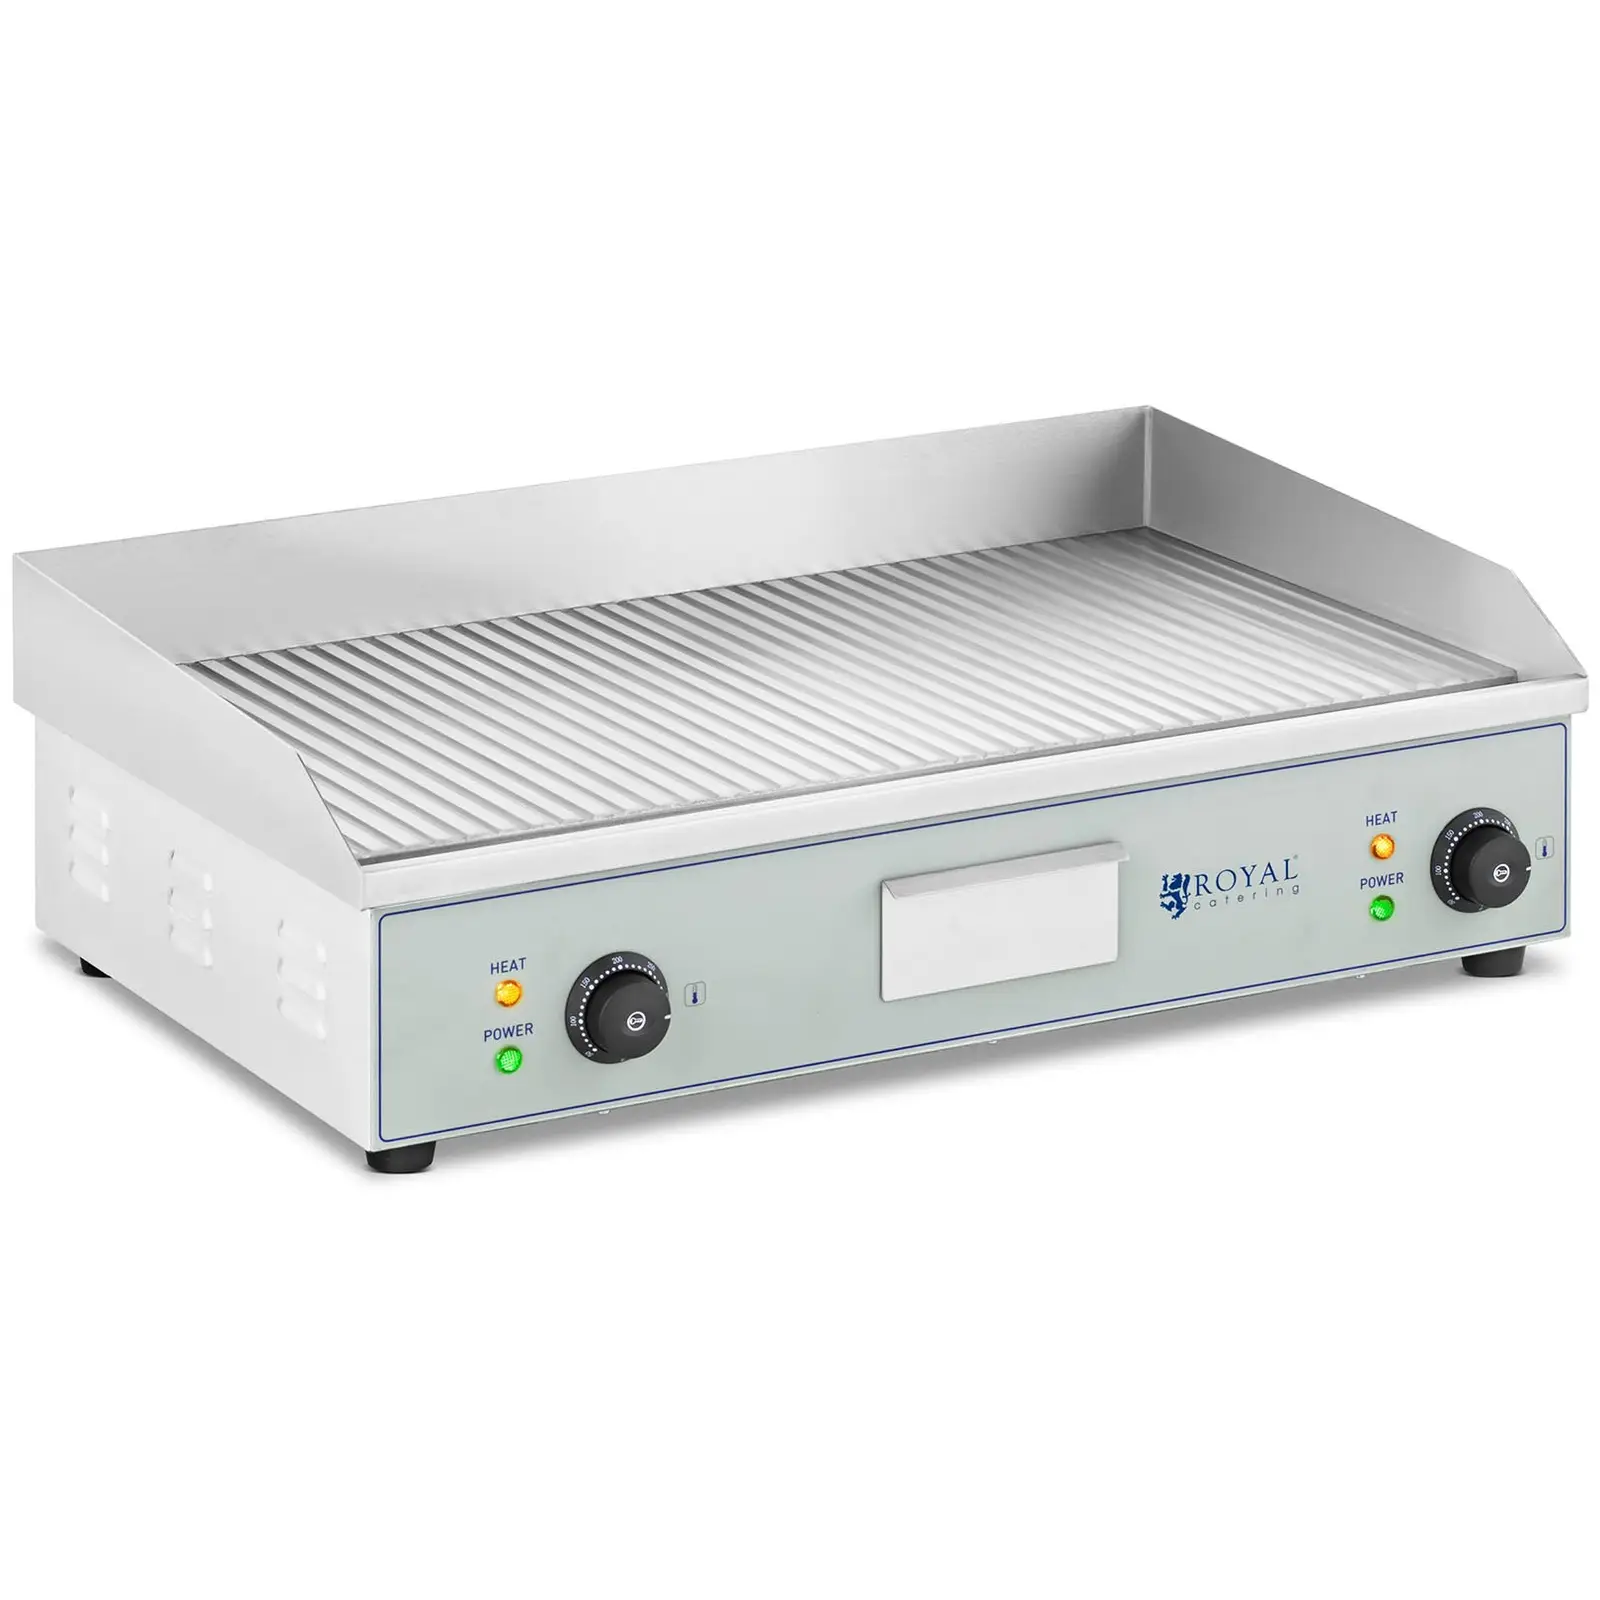 Plancha eléctrica fry-top doble - 400 x 730 mm - Royal Catering - 2 x 2,200 W